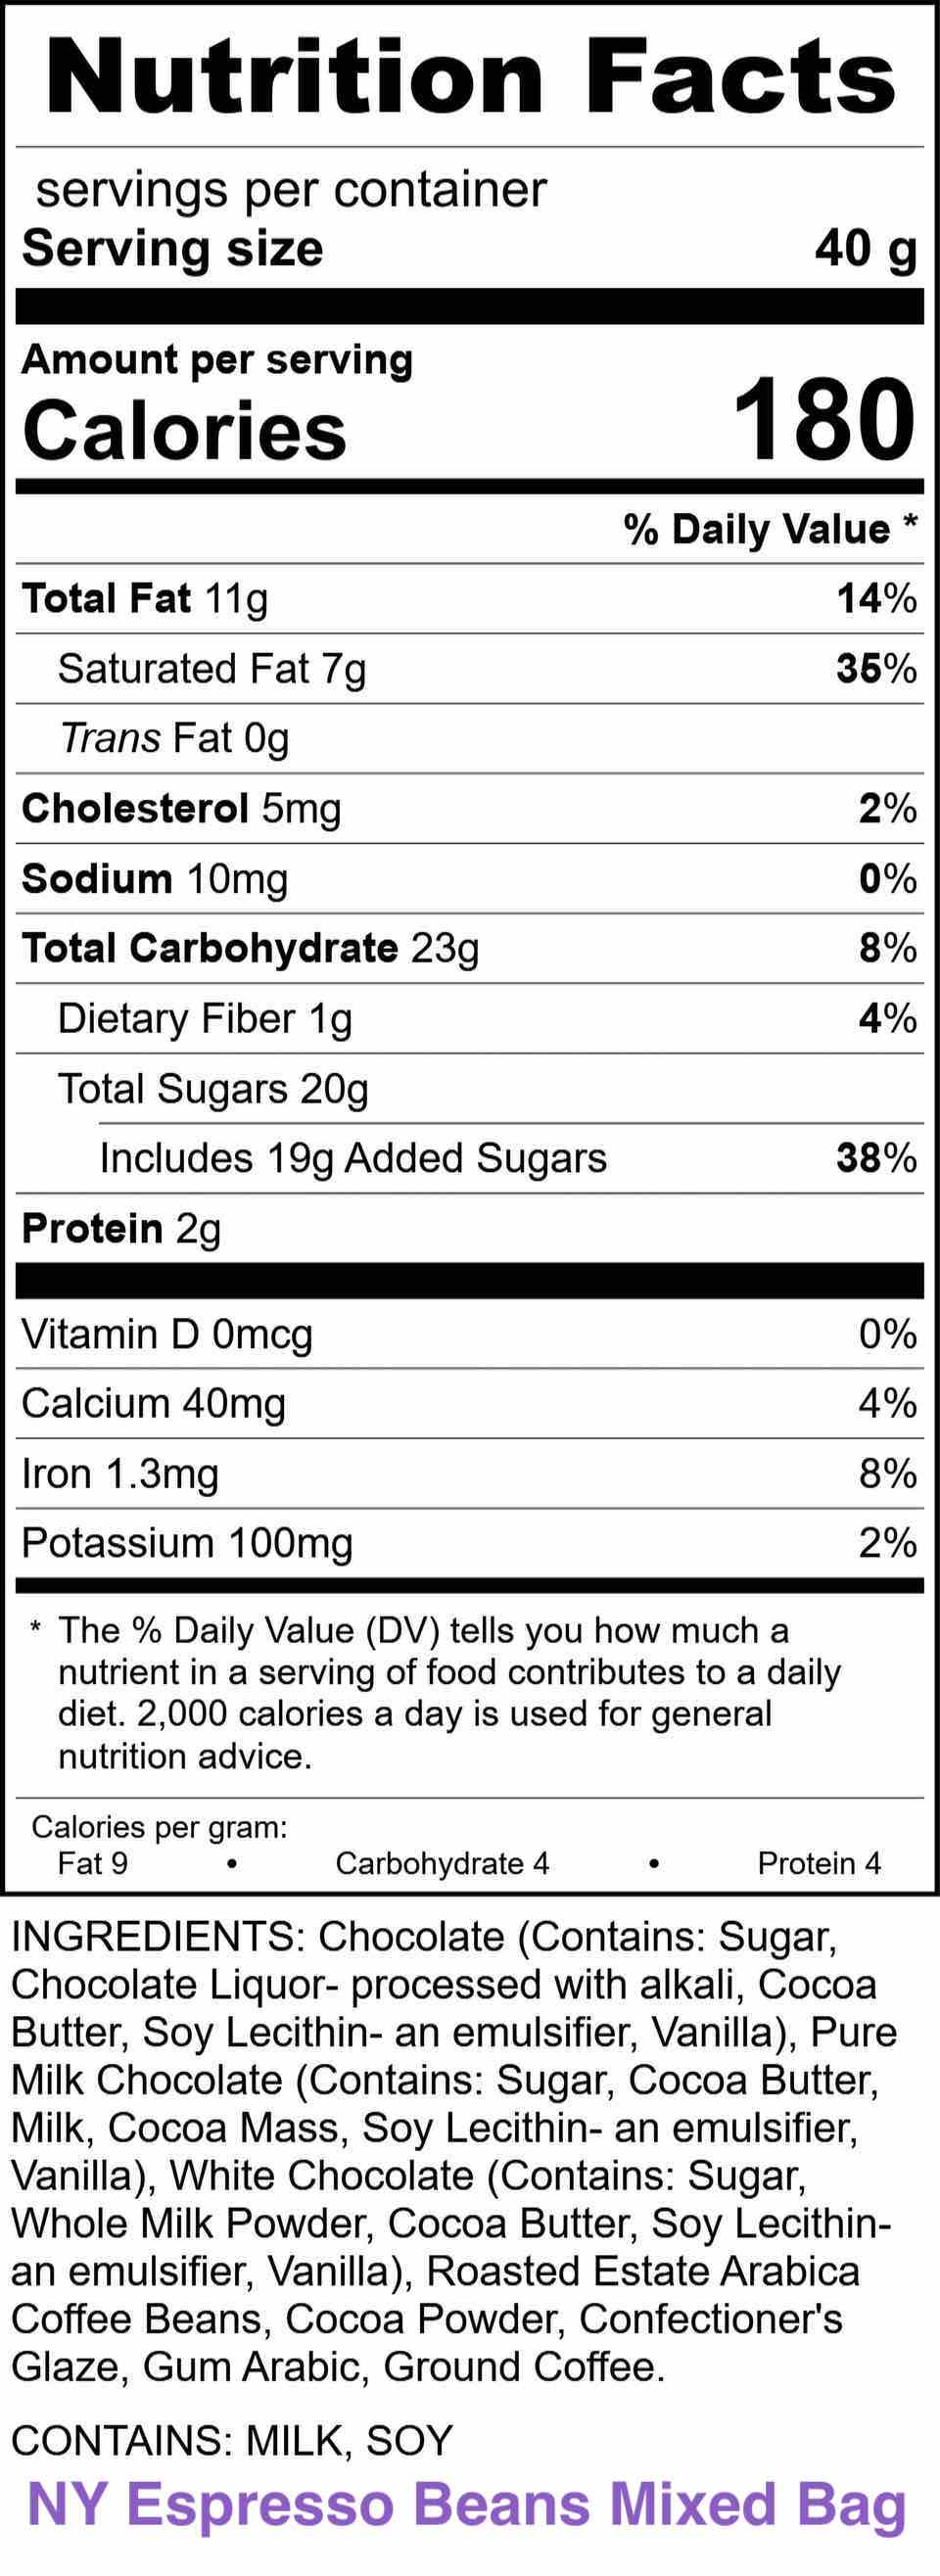 Nutrition Facts - NY Espresso Beans Mixed Bag
Calories 180 
INGREDIENTS: Chocolate (Contains: Sugar, Chocolate Liquor-processed with alkali. Cocoa Butter. Soy Lecithin- an emulsifier, Vanilla), Pure Milk Chocolate (Contains: Sugar, Cocoa Butter Milk, Cocoa Mass, Soy Lecithin- an emulsifier. Vanilla), White Chocolate (Contains: Sugar, Whole Milk Powder, Cocoa Butter, Soy Lecithin an emulsifier, Vanilla), Roasted Estate Arabica Coffee Beans, Cocoa Powder, Confectioner's Glaze, Gum Arabic, Ground Coffee.

CONTAINS: MILK, SOY